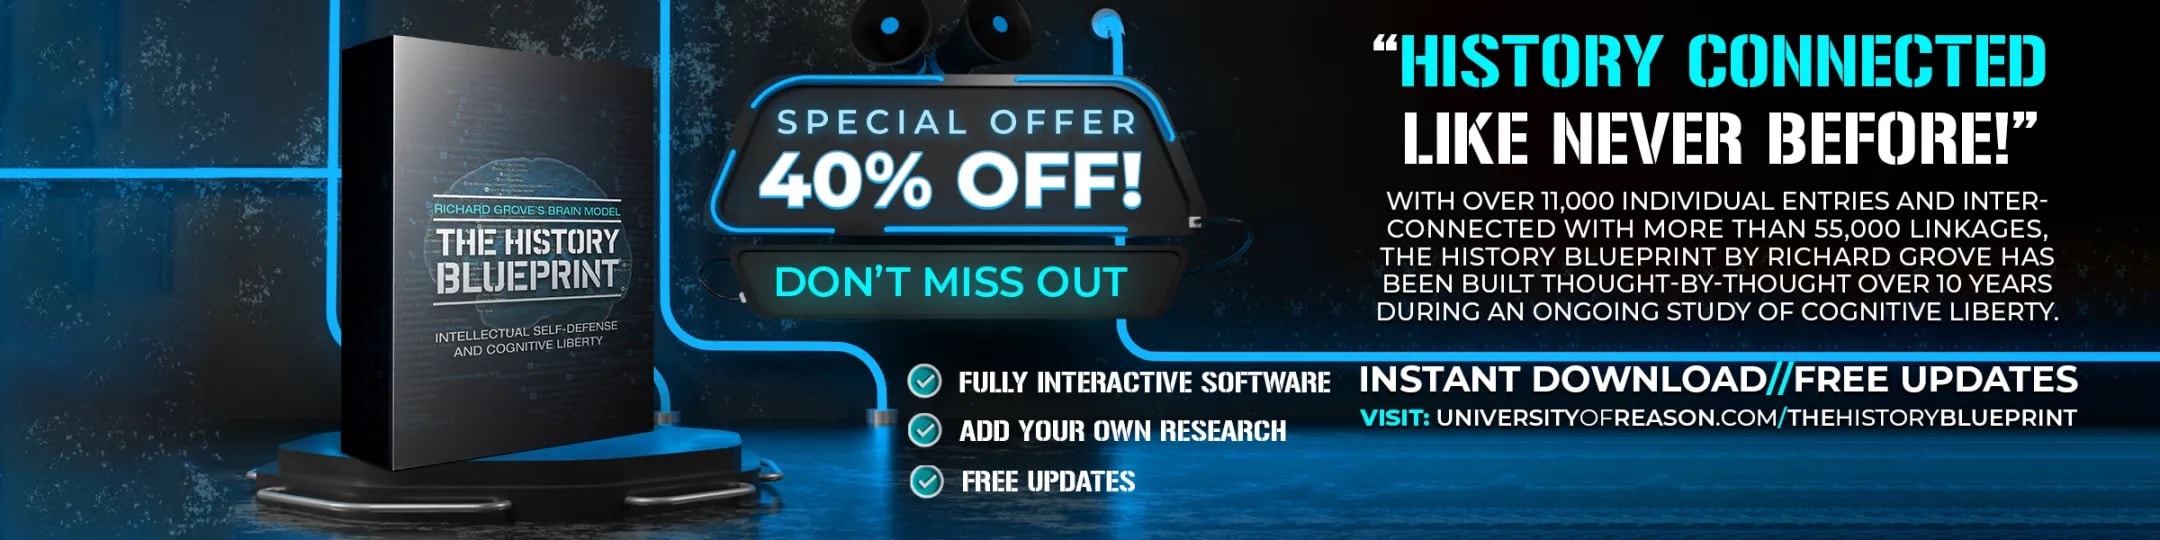 The History Blueprint - 40% OFF!